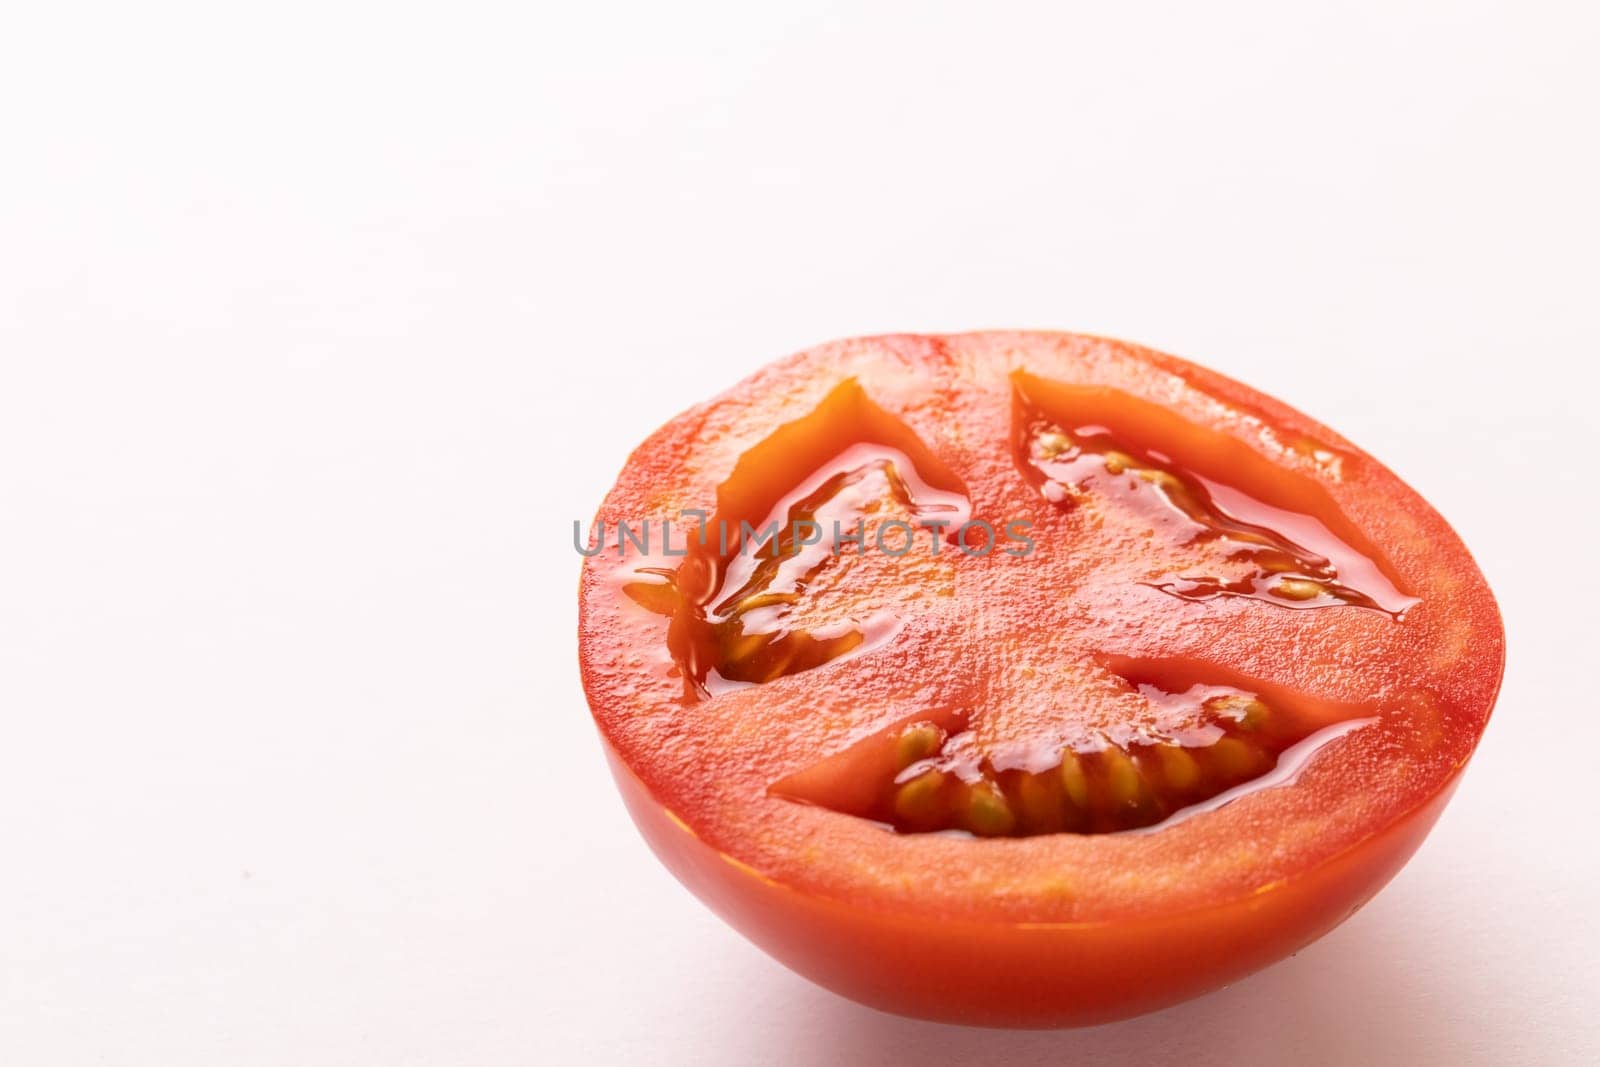 Close-up of fresh single red tomato half by copy space on white background. unaltered, food, healthy eating, organic concept.